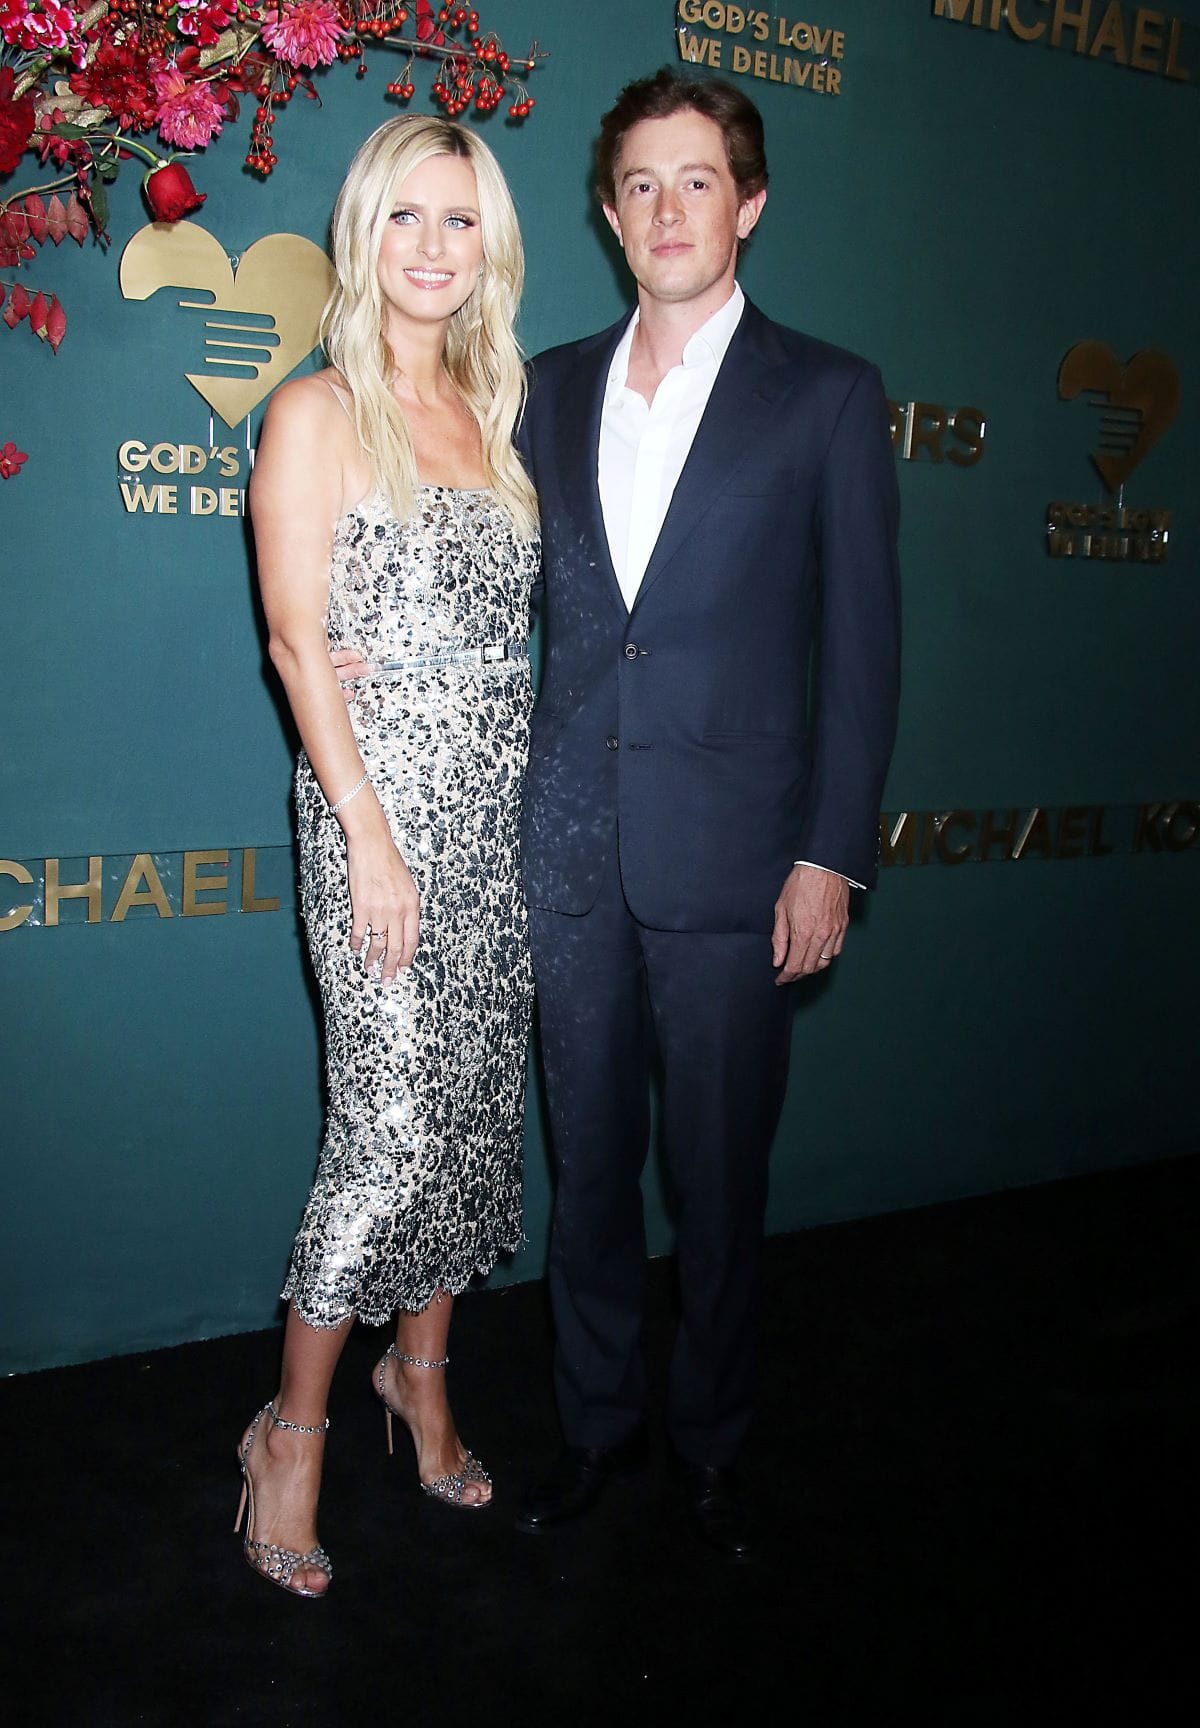 Nicky Hilton and her husband, James Rothschild, attend the 16th annual God's Love We Deliver Golden Heart Awards